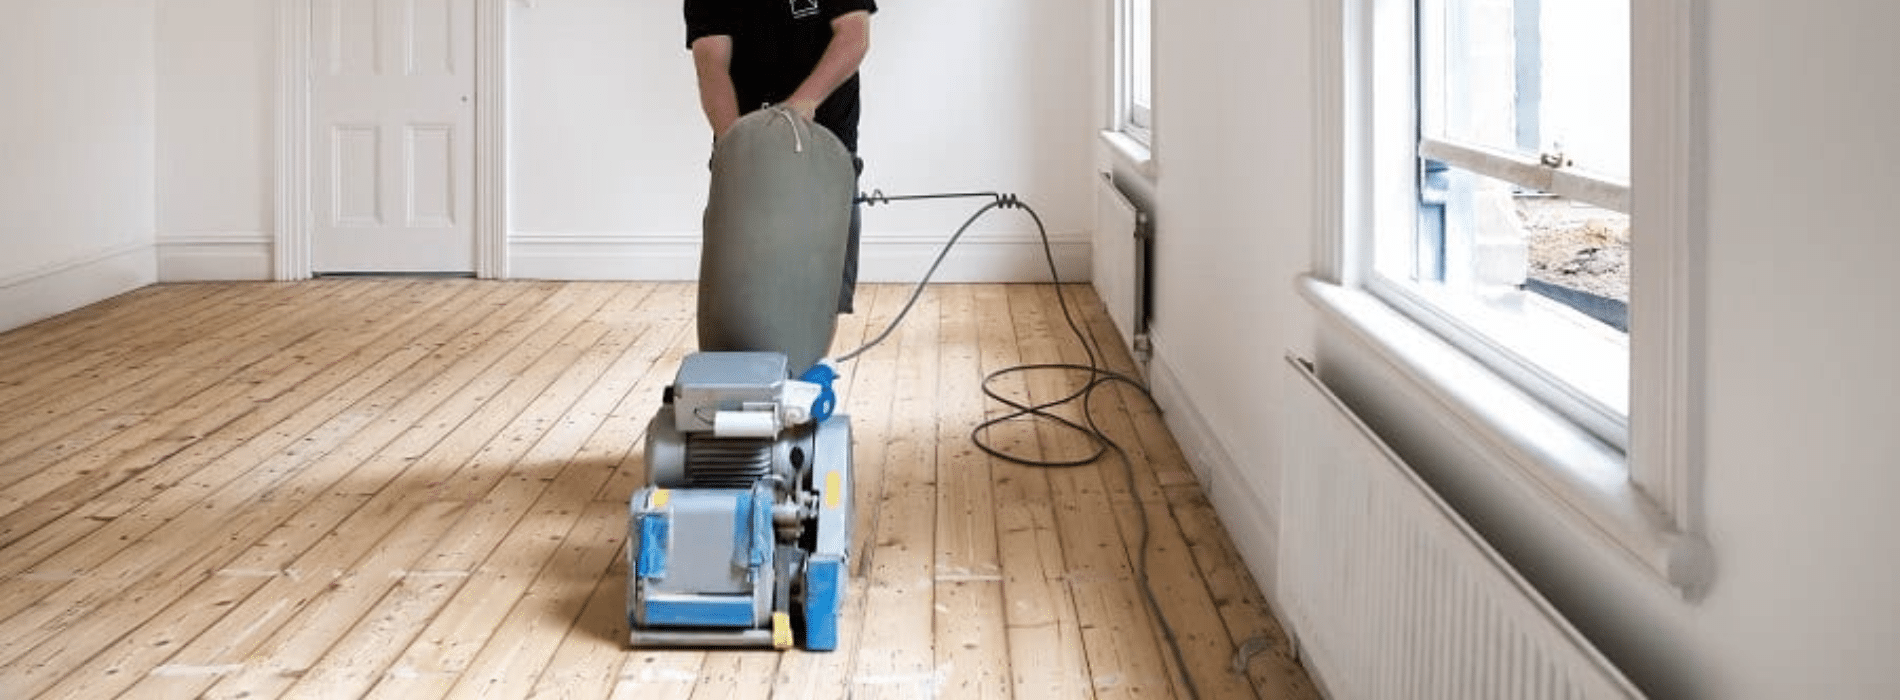 Mr Sander® are using a Bona Scorpion drum sander with a dimension of 200 mm, 1.5 kW power, and 240 V voltage in Emerson Park, RM1. The sander operates at a frequency of 50 Hz and is connected to a dust extraction system with a HEPA filter for a clean and efficient outcome.